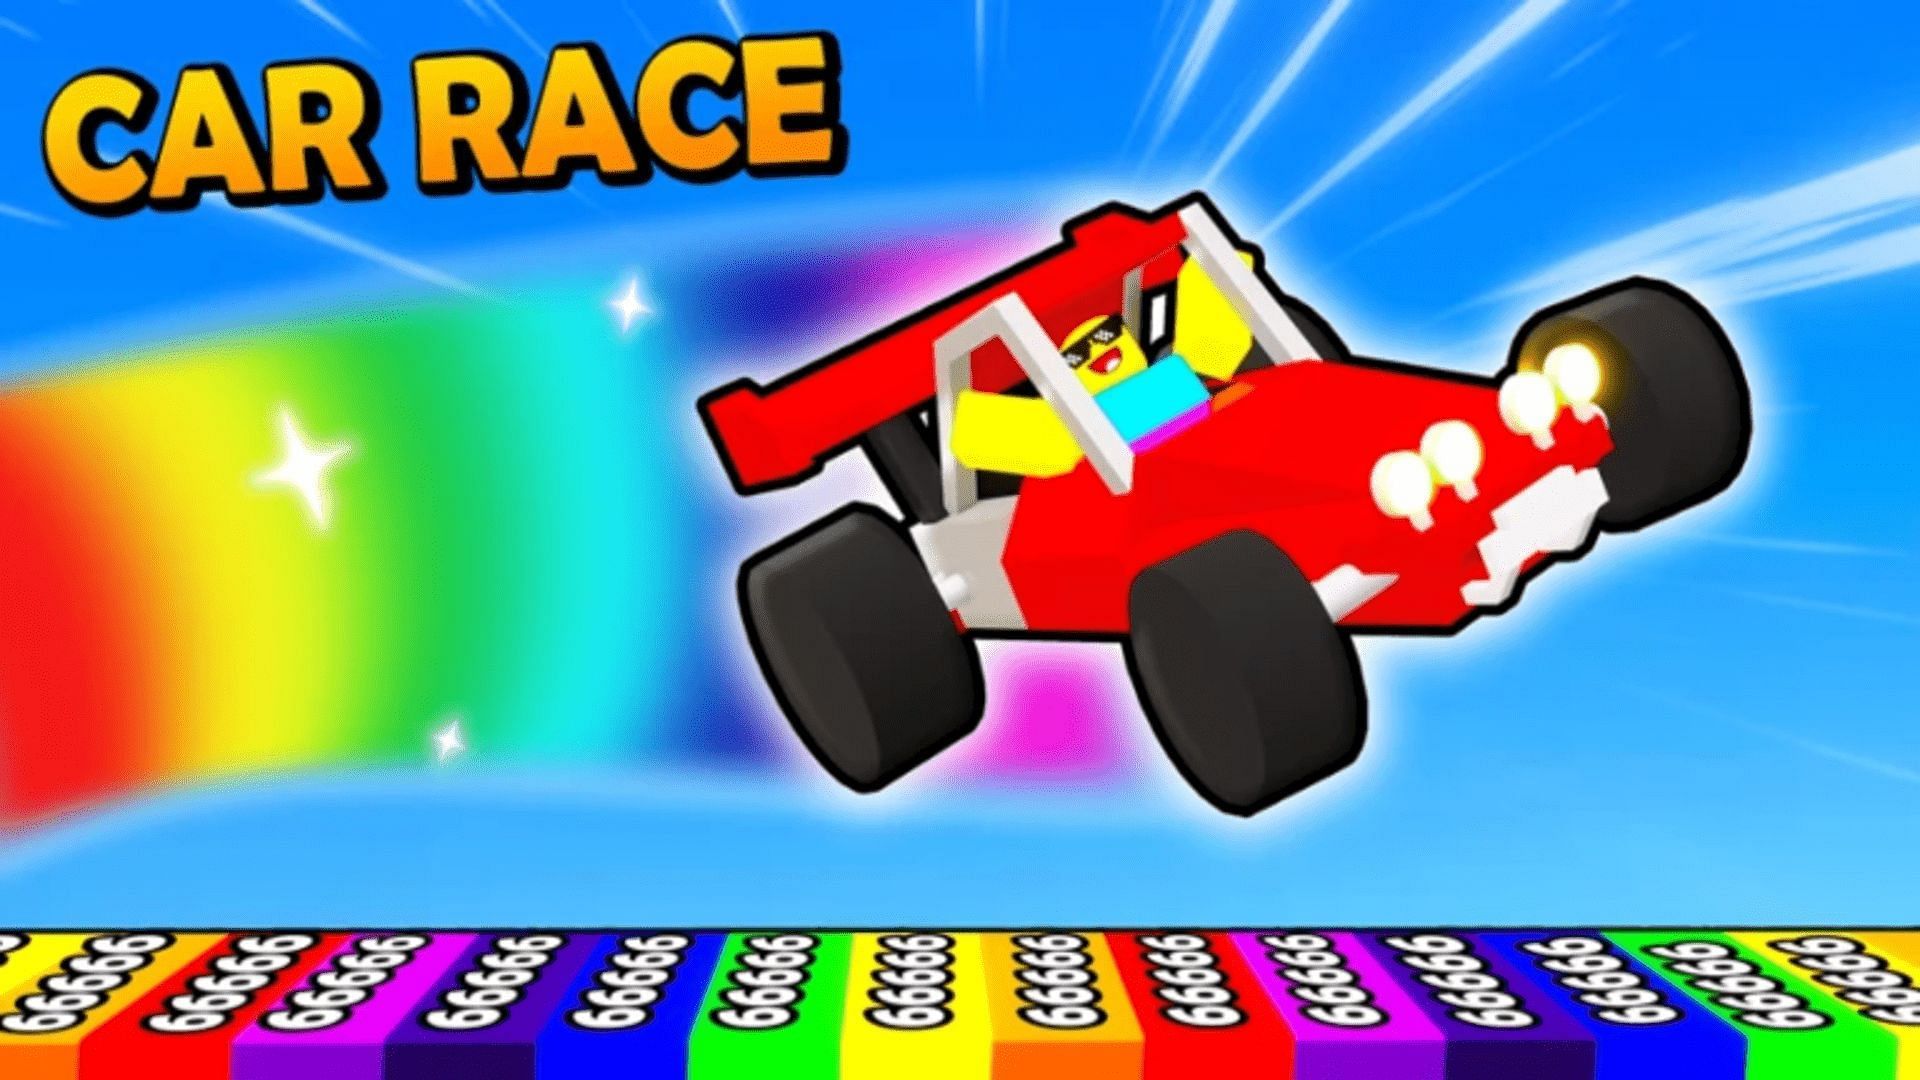 Active codes for Car Race (Image via Roblox)